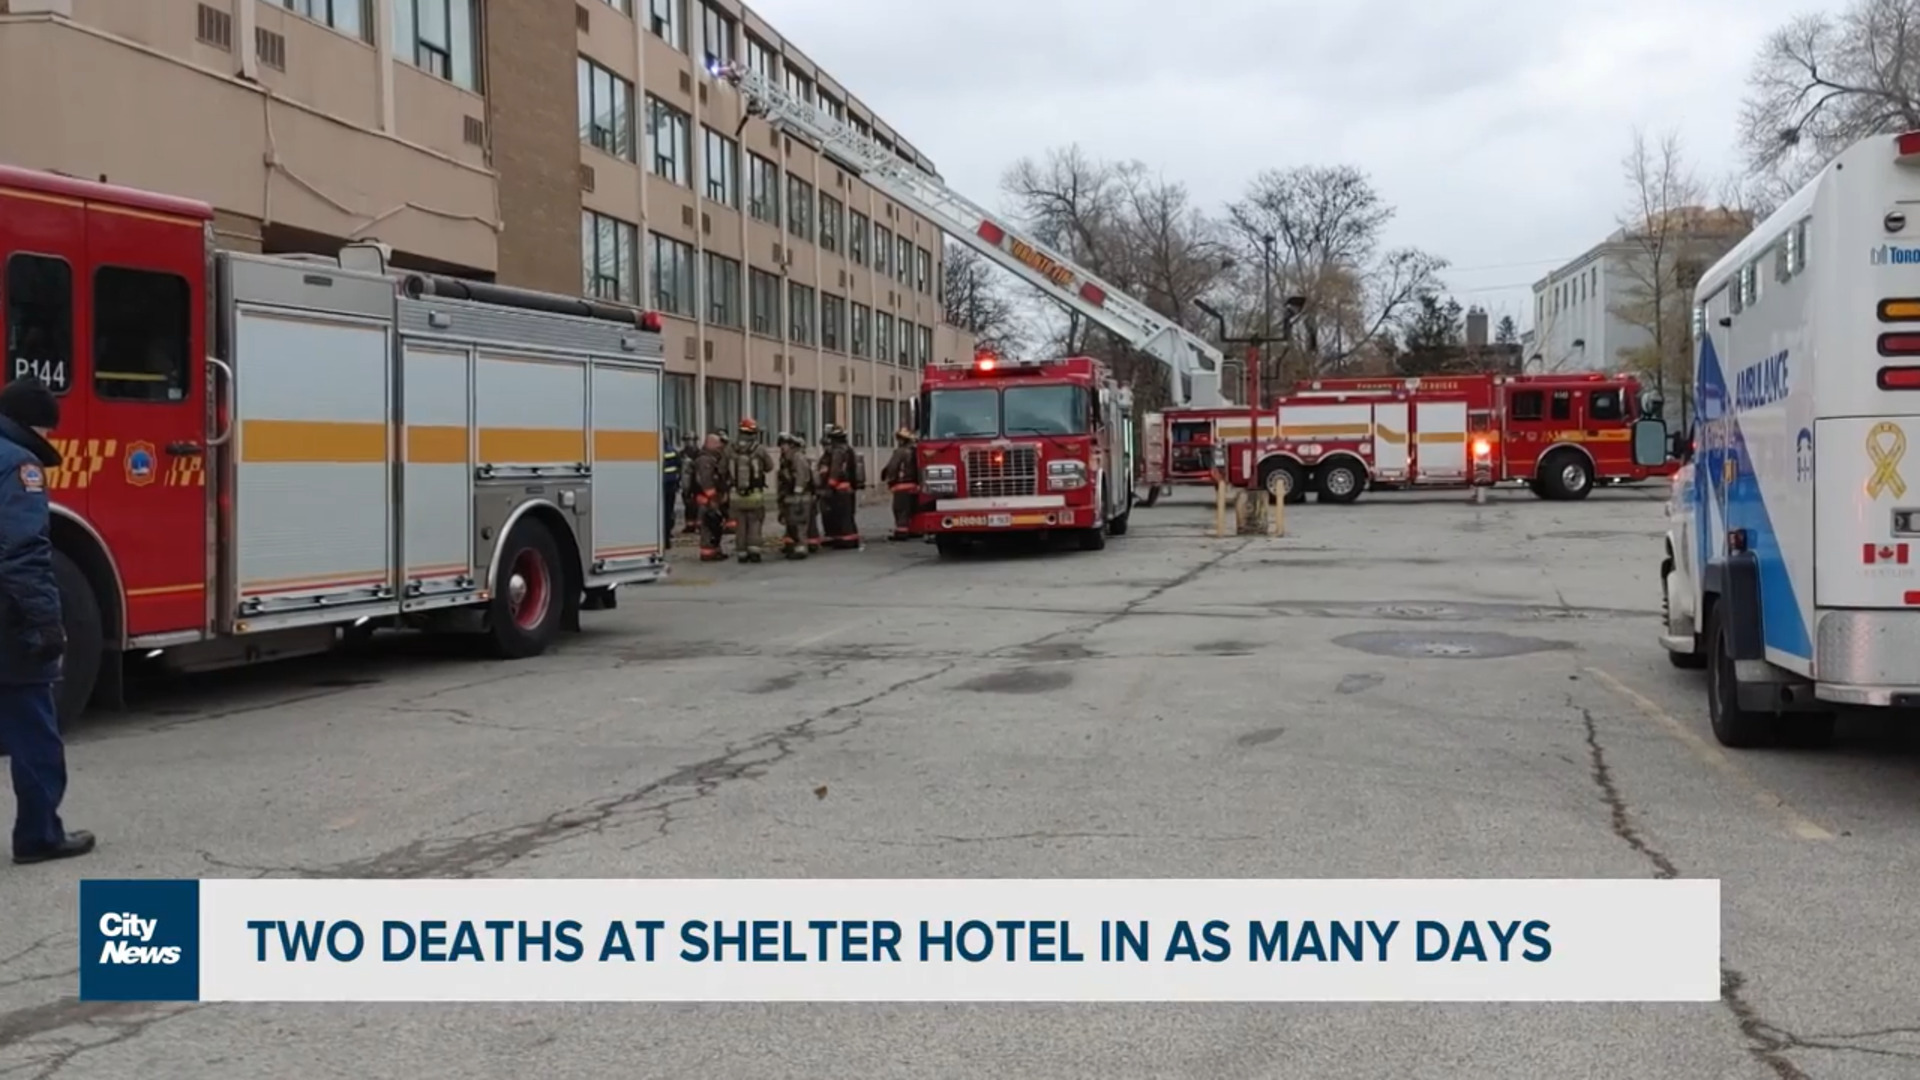 One person dead after fire at North York shelter hotel